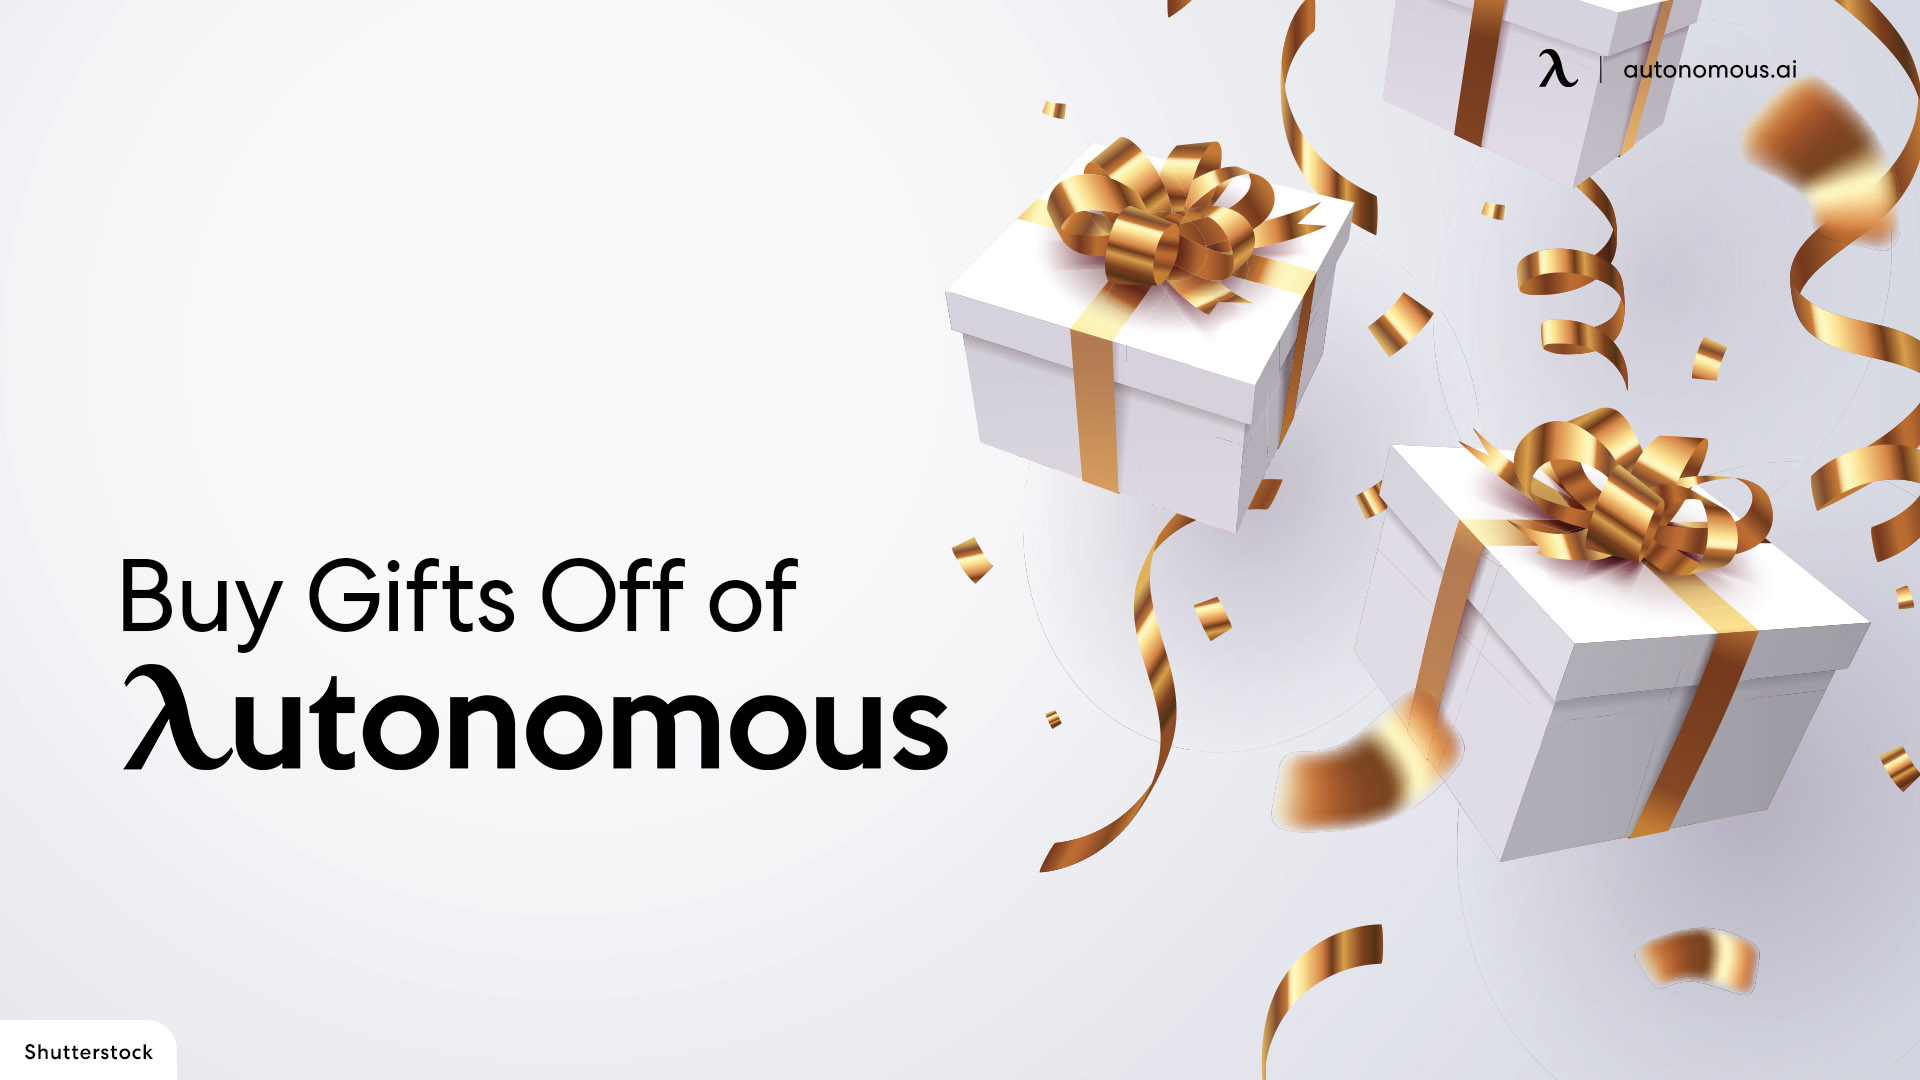 Buy Gifts Off of Autonomous